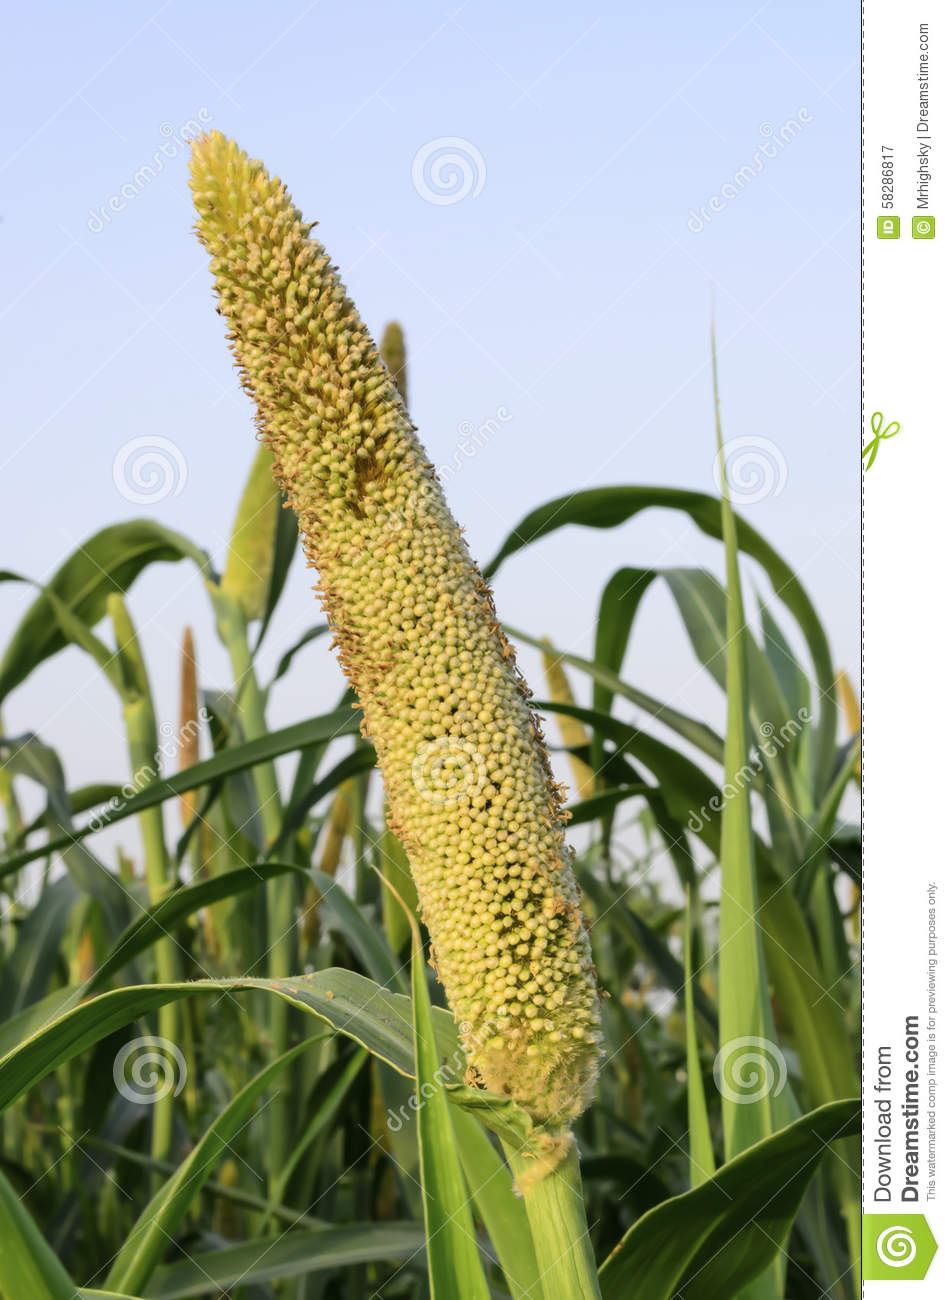 Pearl Millet Seed Head Stock Photo.